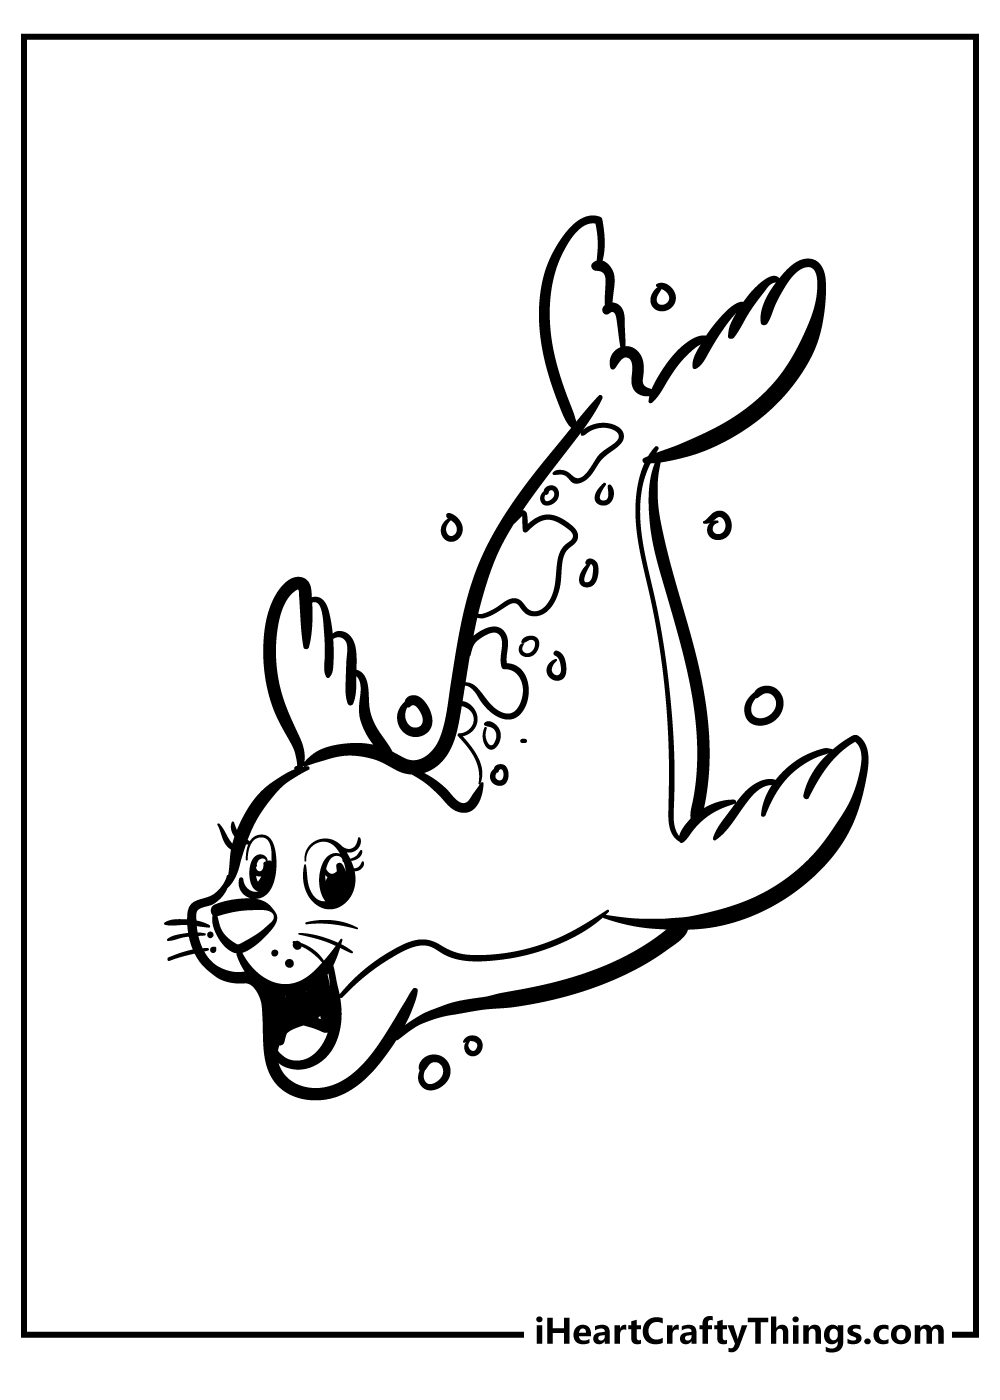 Seal coloring pages free printables